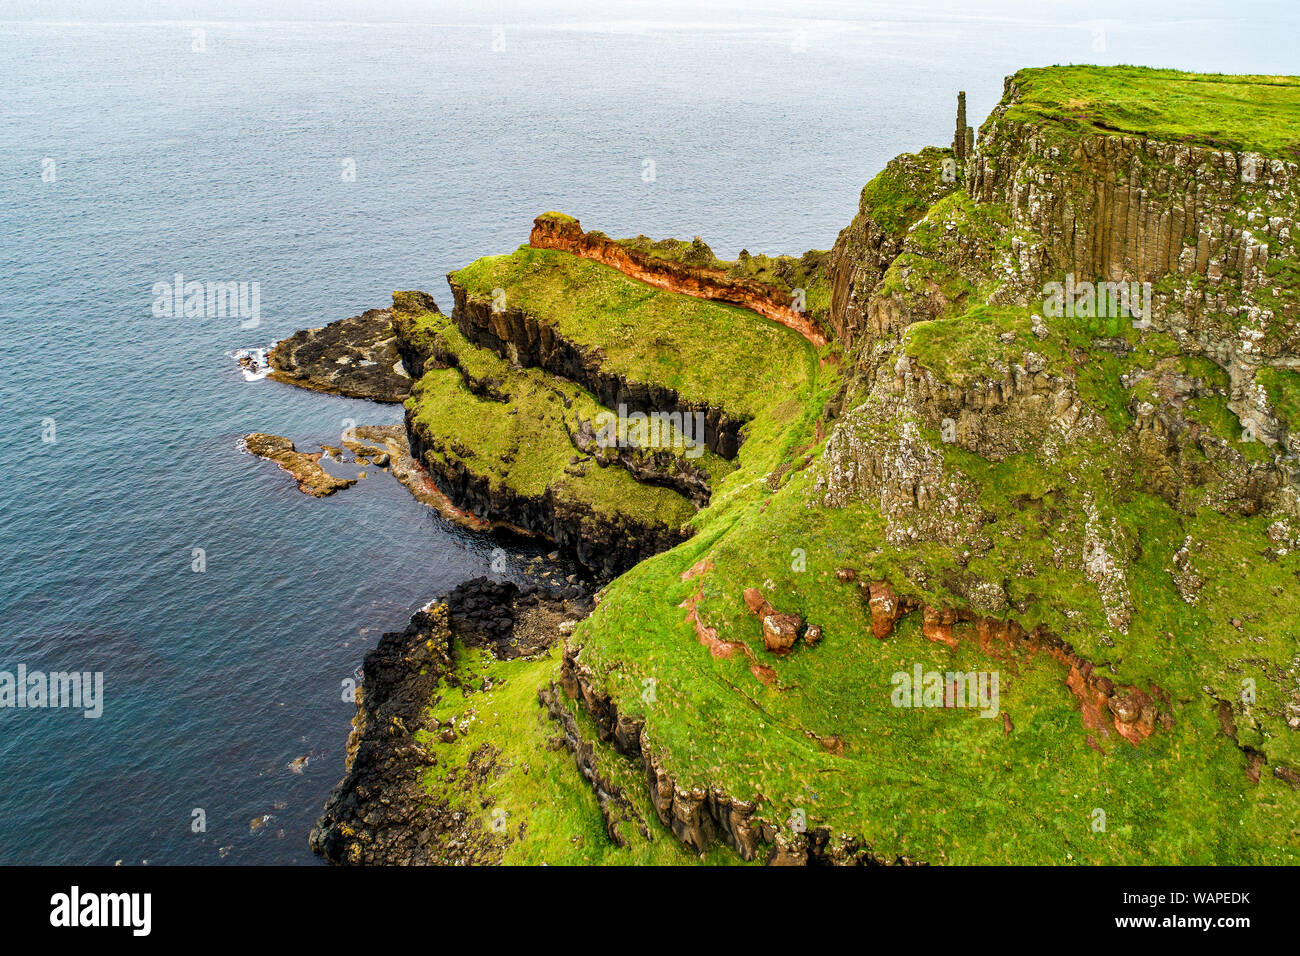 Northern Ireland, UK. Cliffs at Atlantic coast in County Antrim with visible geological strata, and volcanic basalt formation of natural hexagonal pol Stock Photo